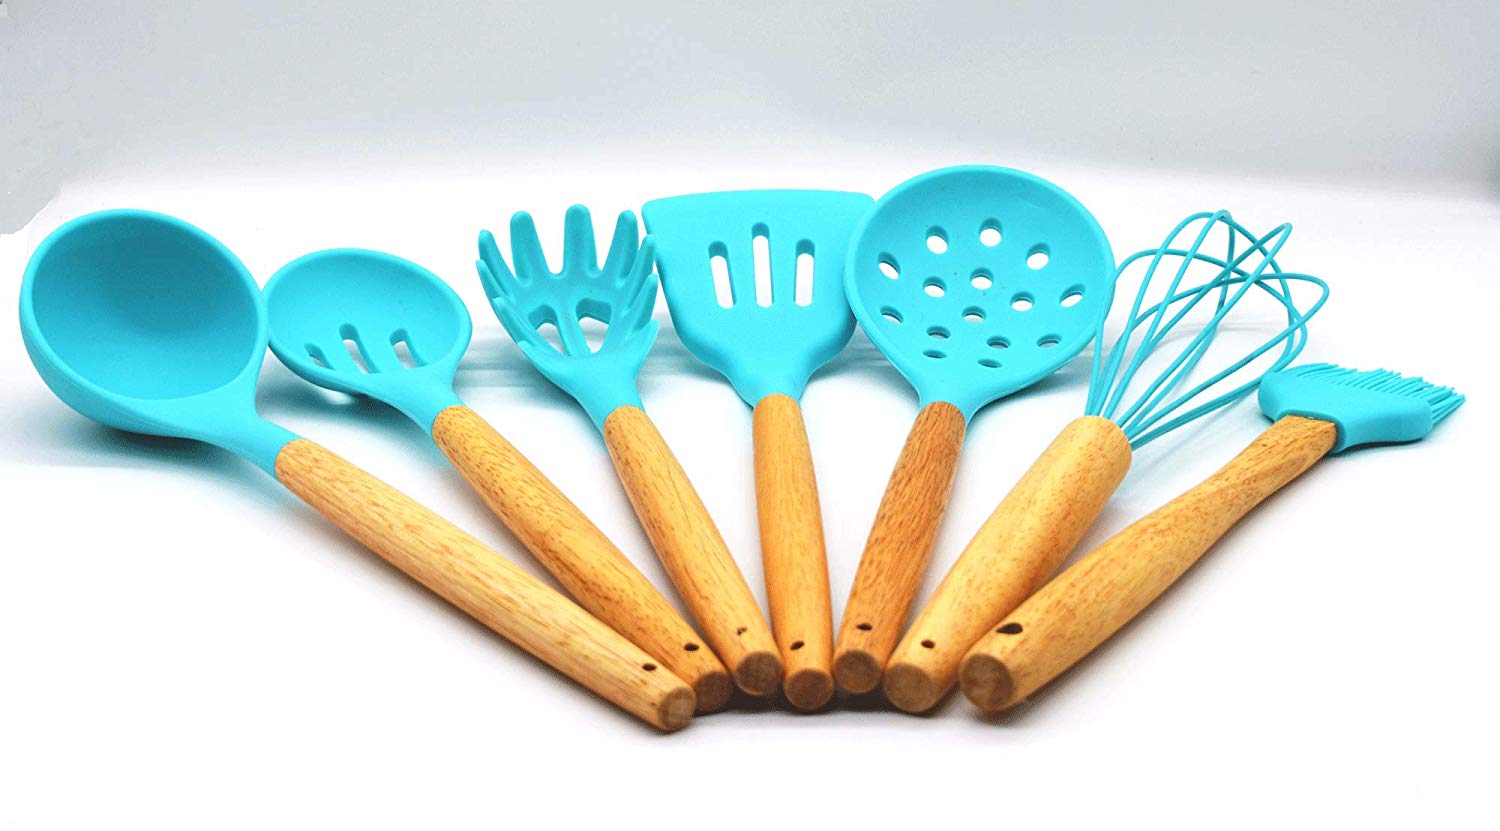 8 Piece Silicone Cooking Utensils Set With Holder / Teal